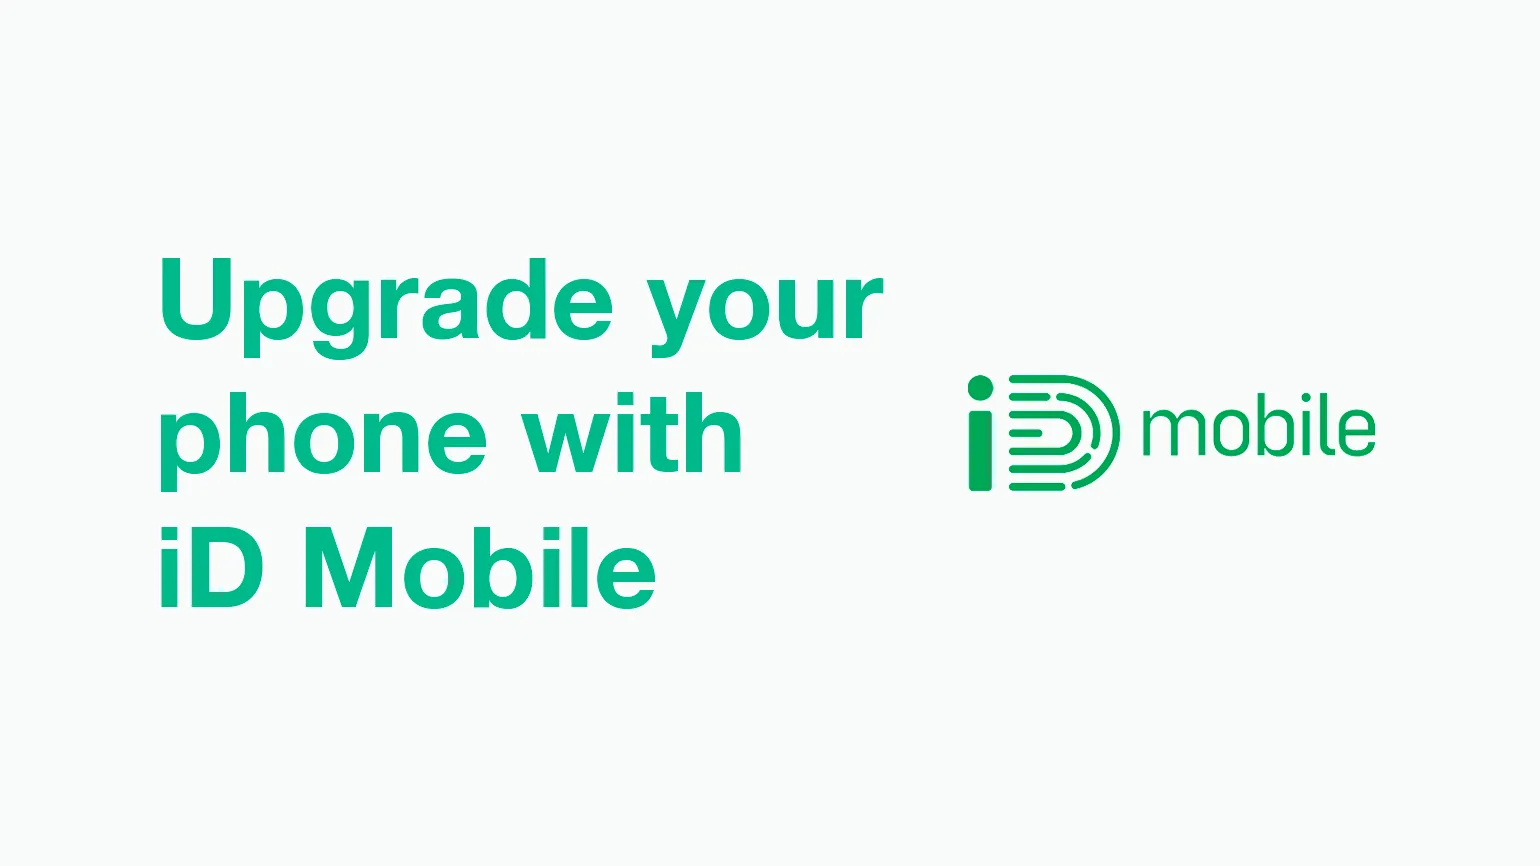 Upgrading your phone on iD Mobile